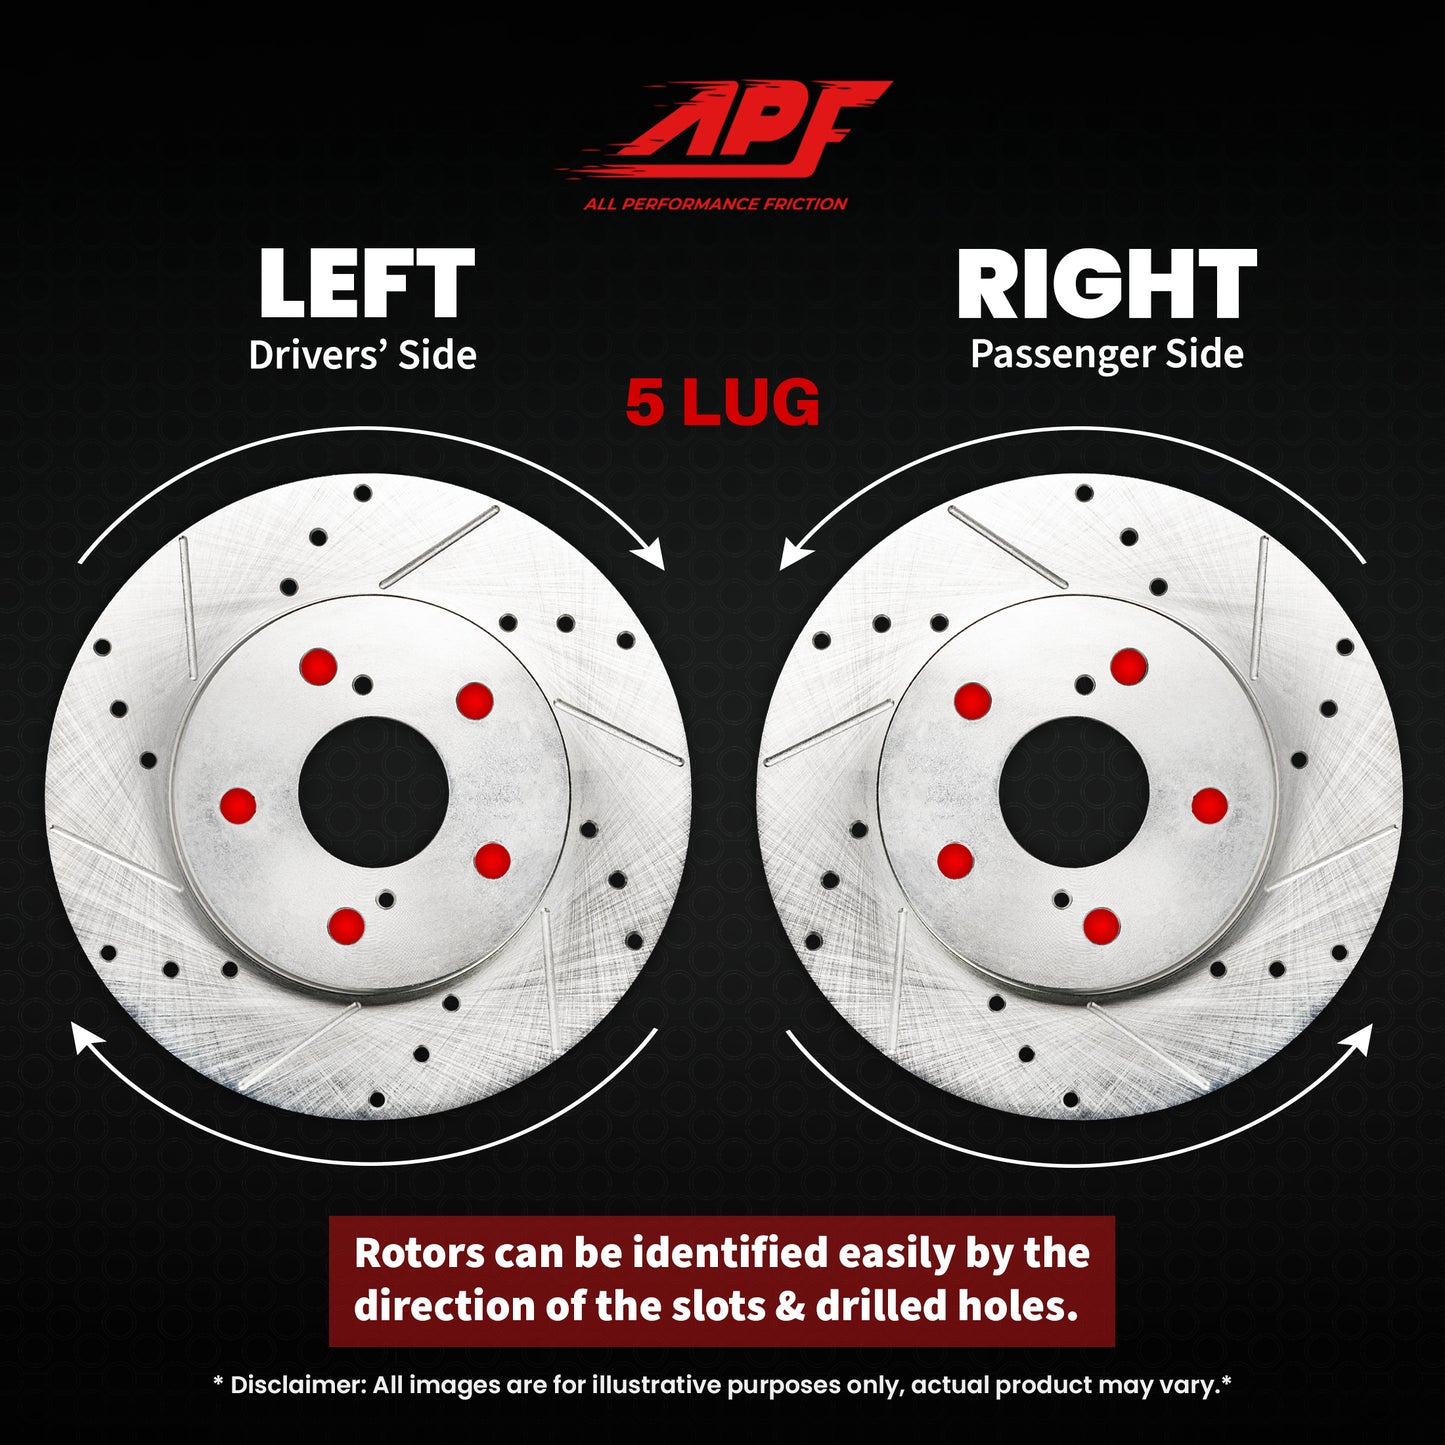 APF All Performance Friction Front Rotors compatible with Lexus ES300h 2013-2018 Zinc Drilled Slotted Rotors | $140.42